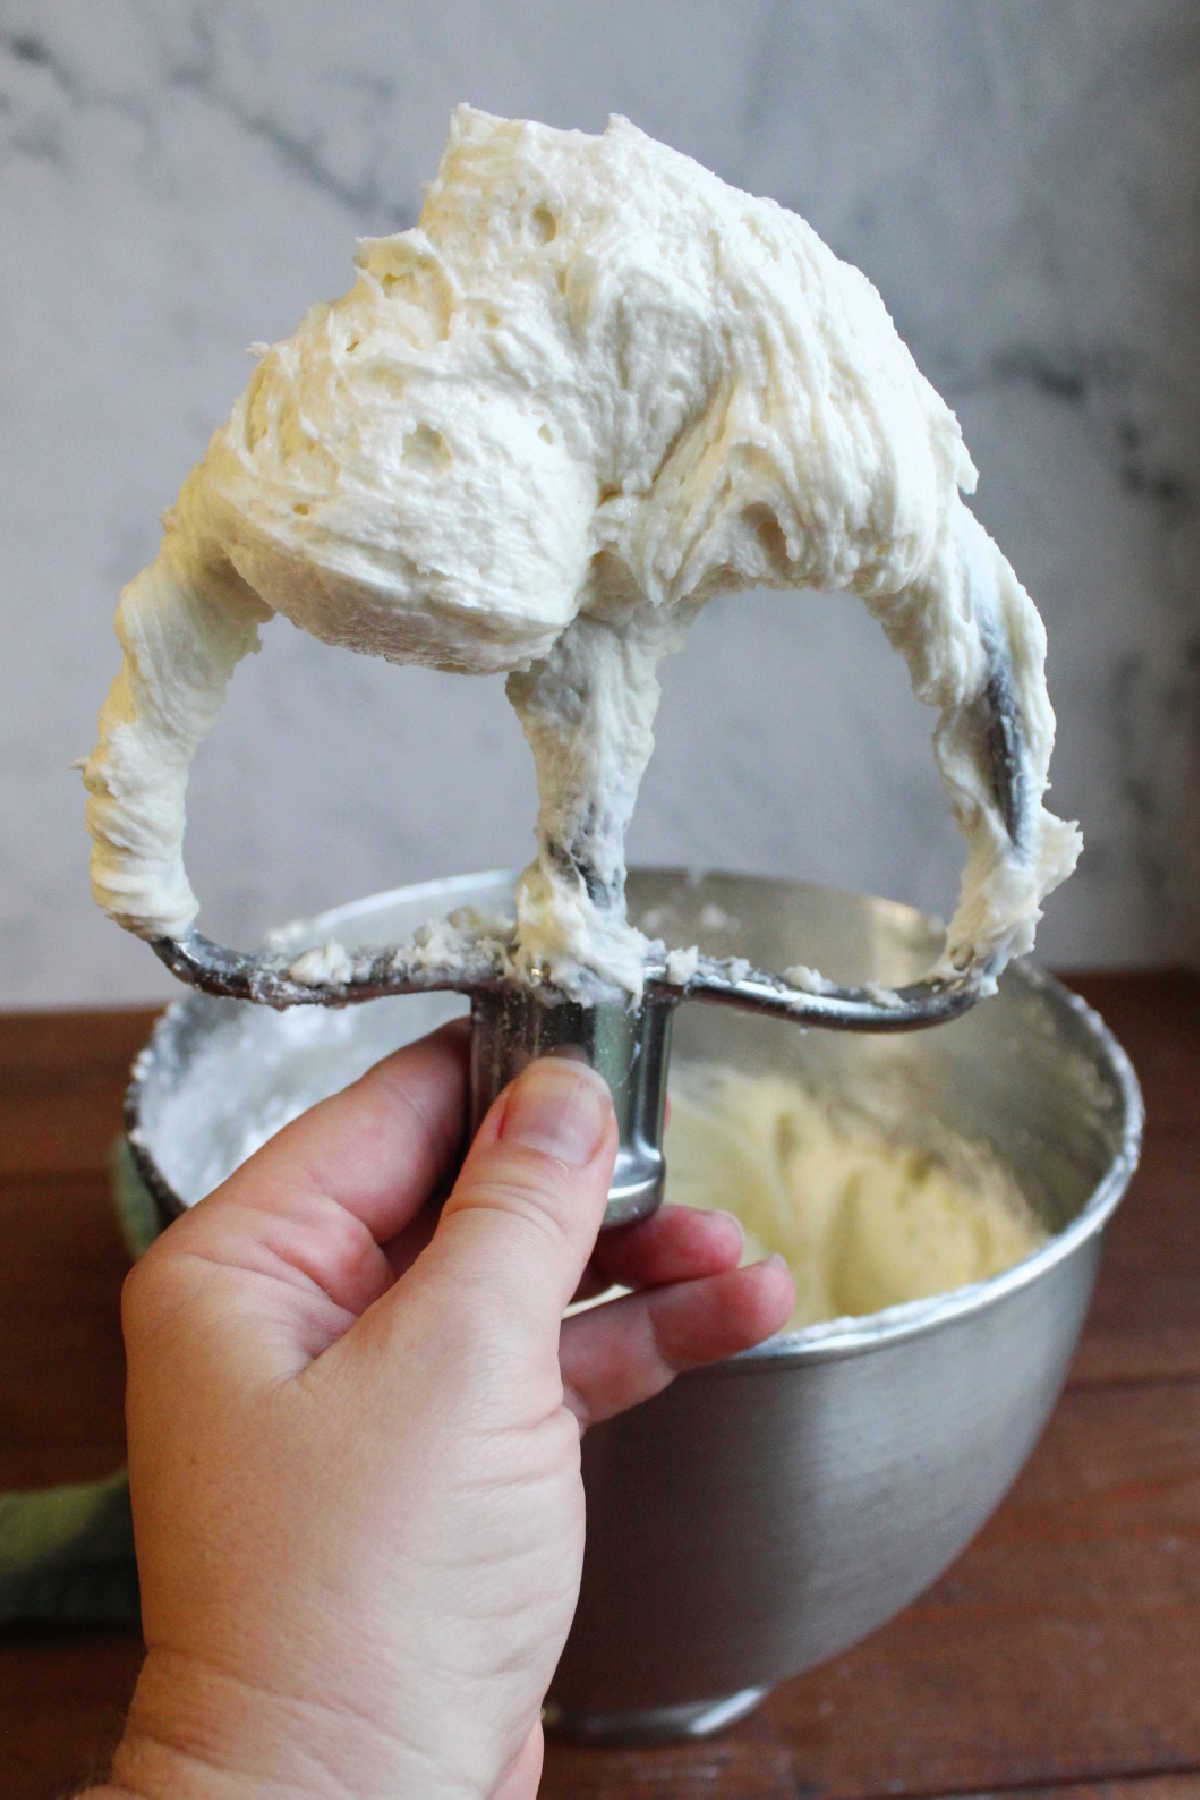 Hand holding mixer paddle with a bunch of fluffy decorator's cream cheese frosting on it, ready to be used.